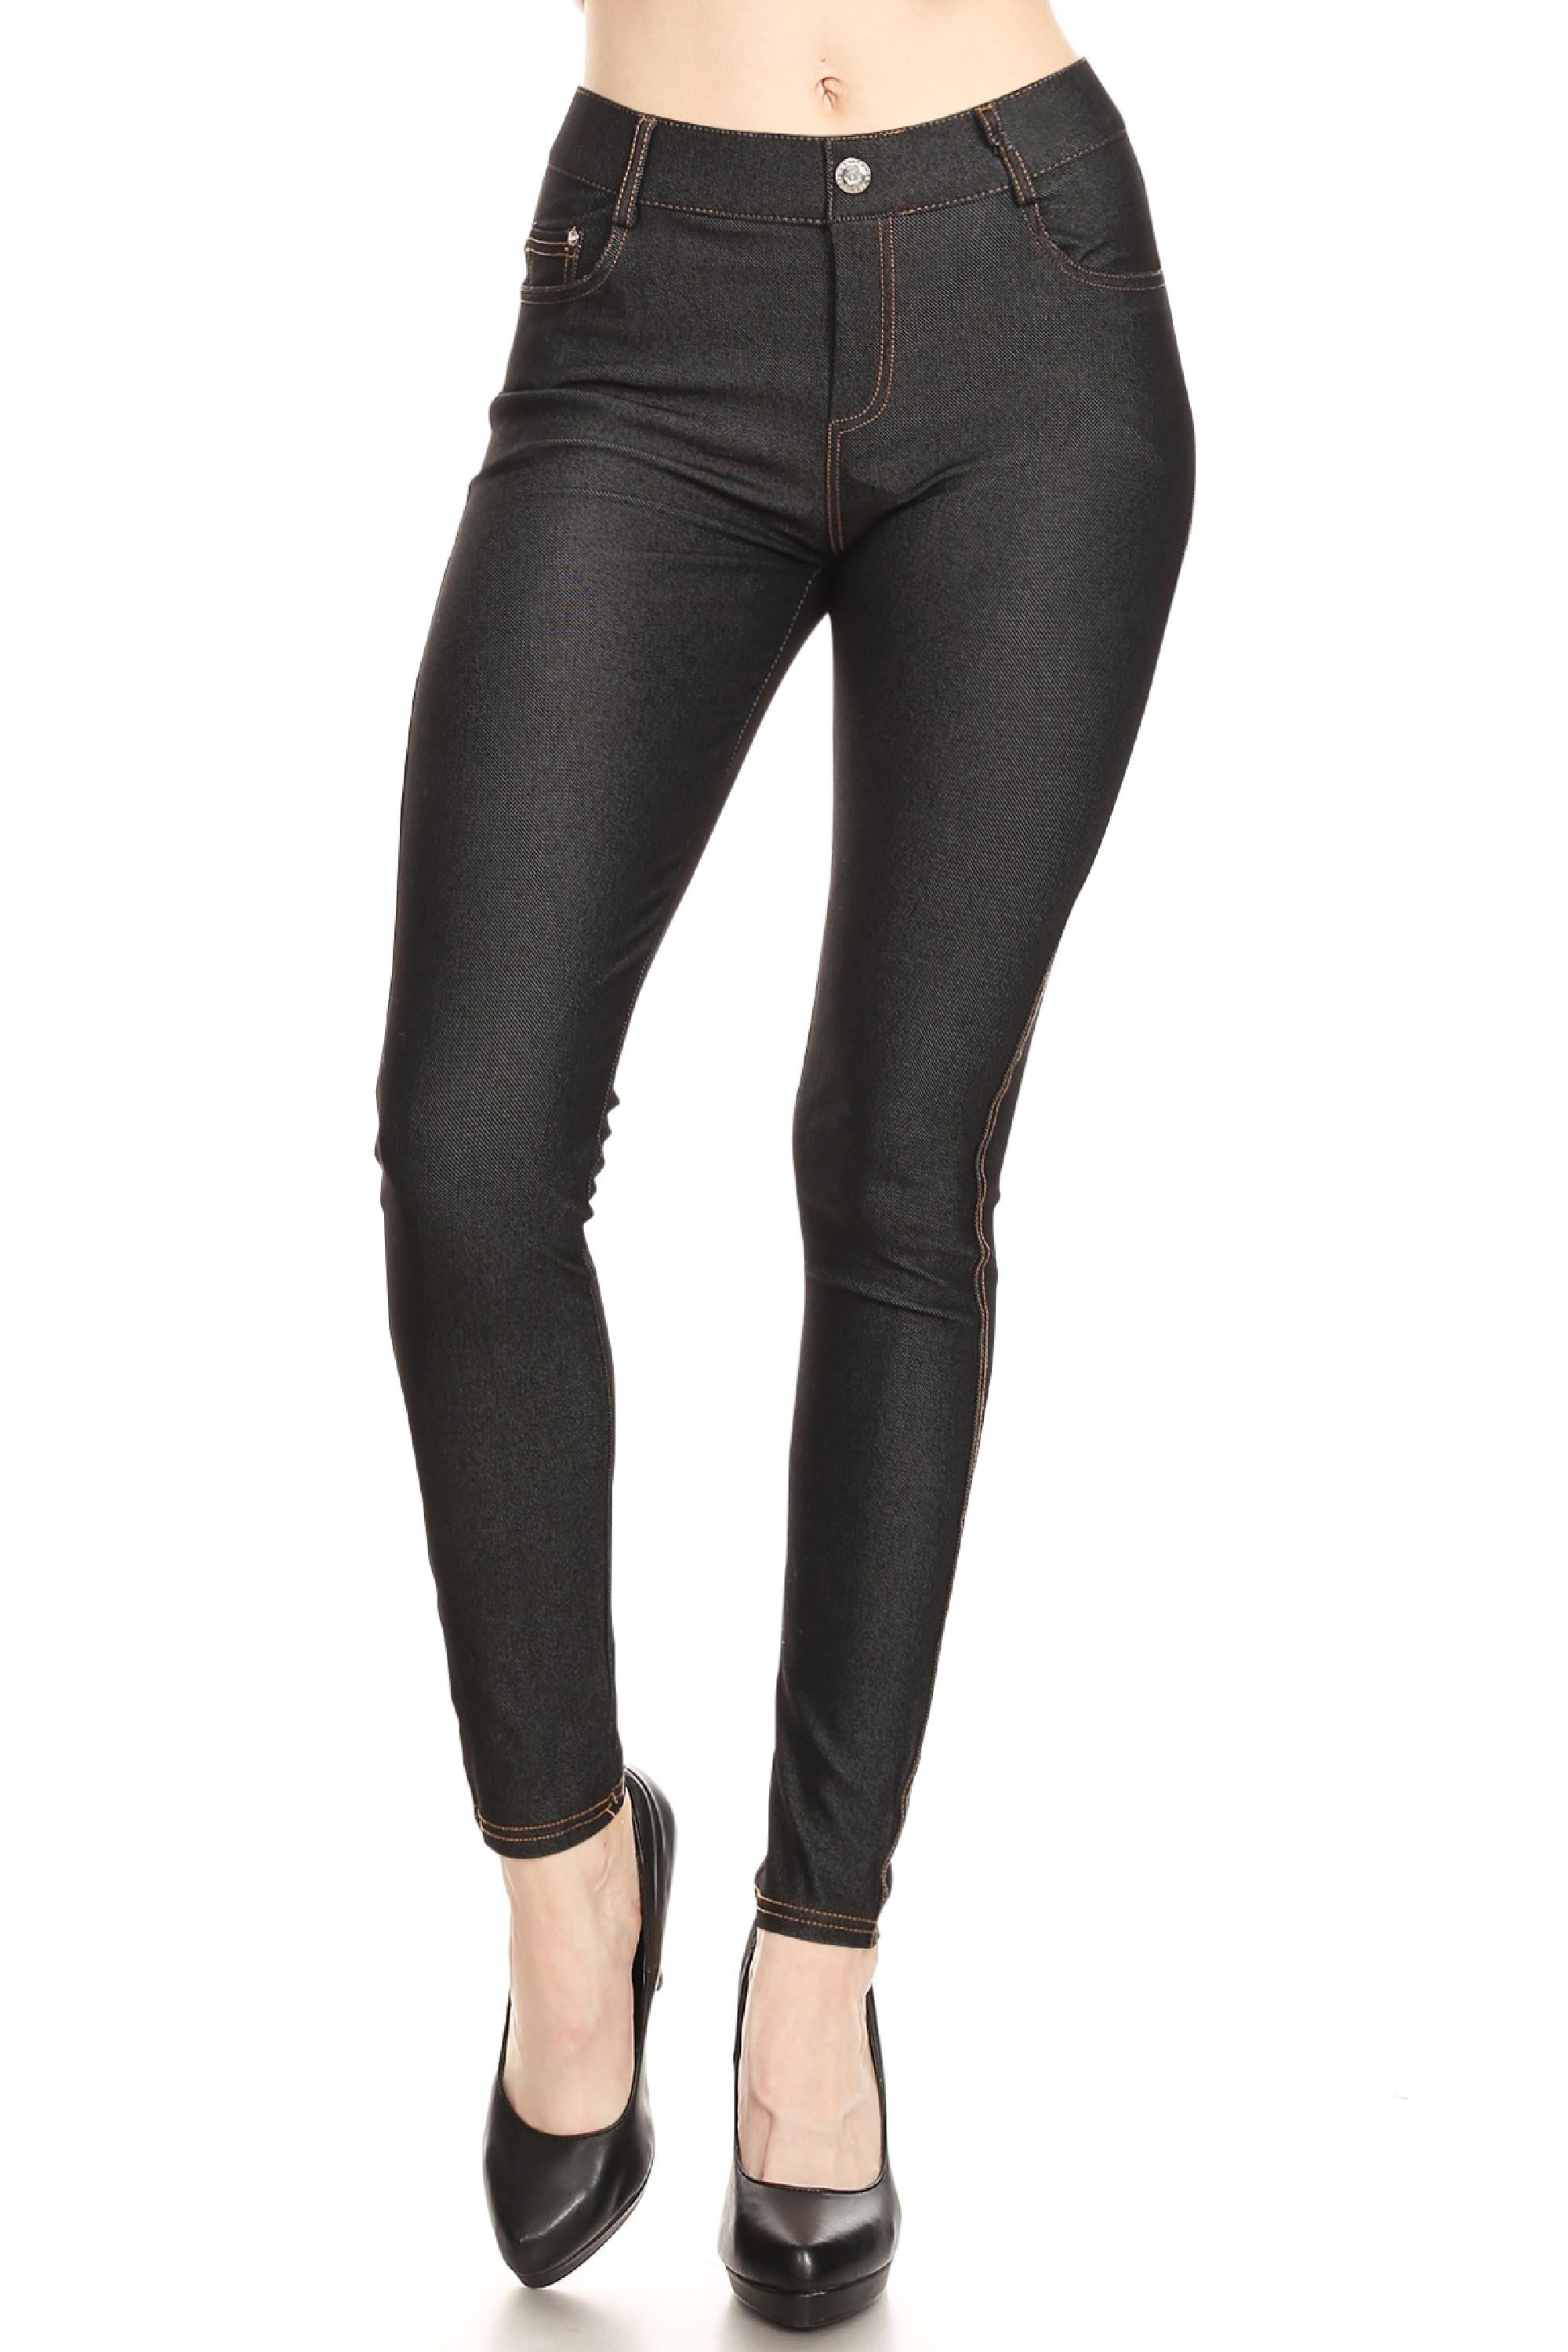 Women's Stretch Jeggings with Pockets Slimming Pull On Jean Jeggings ...